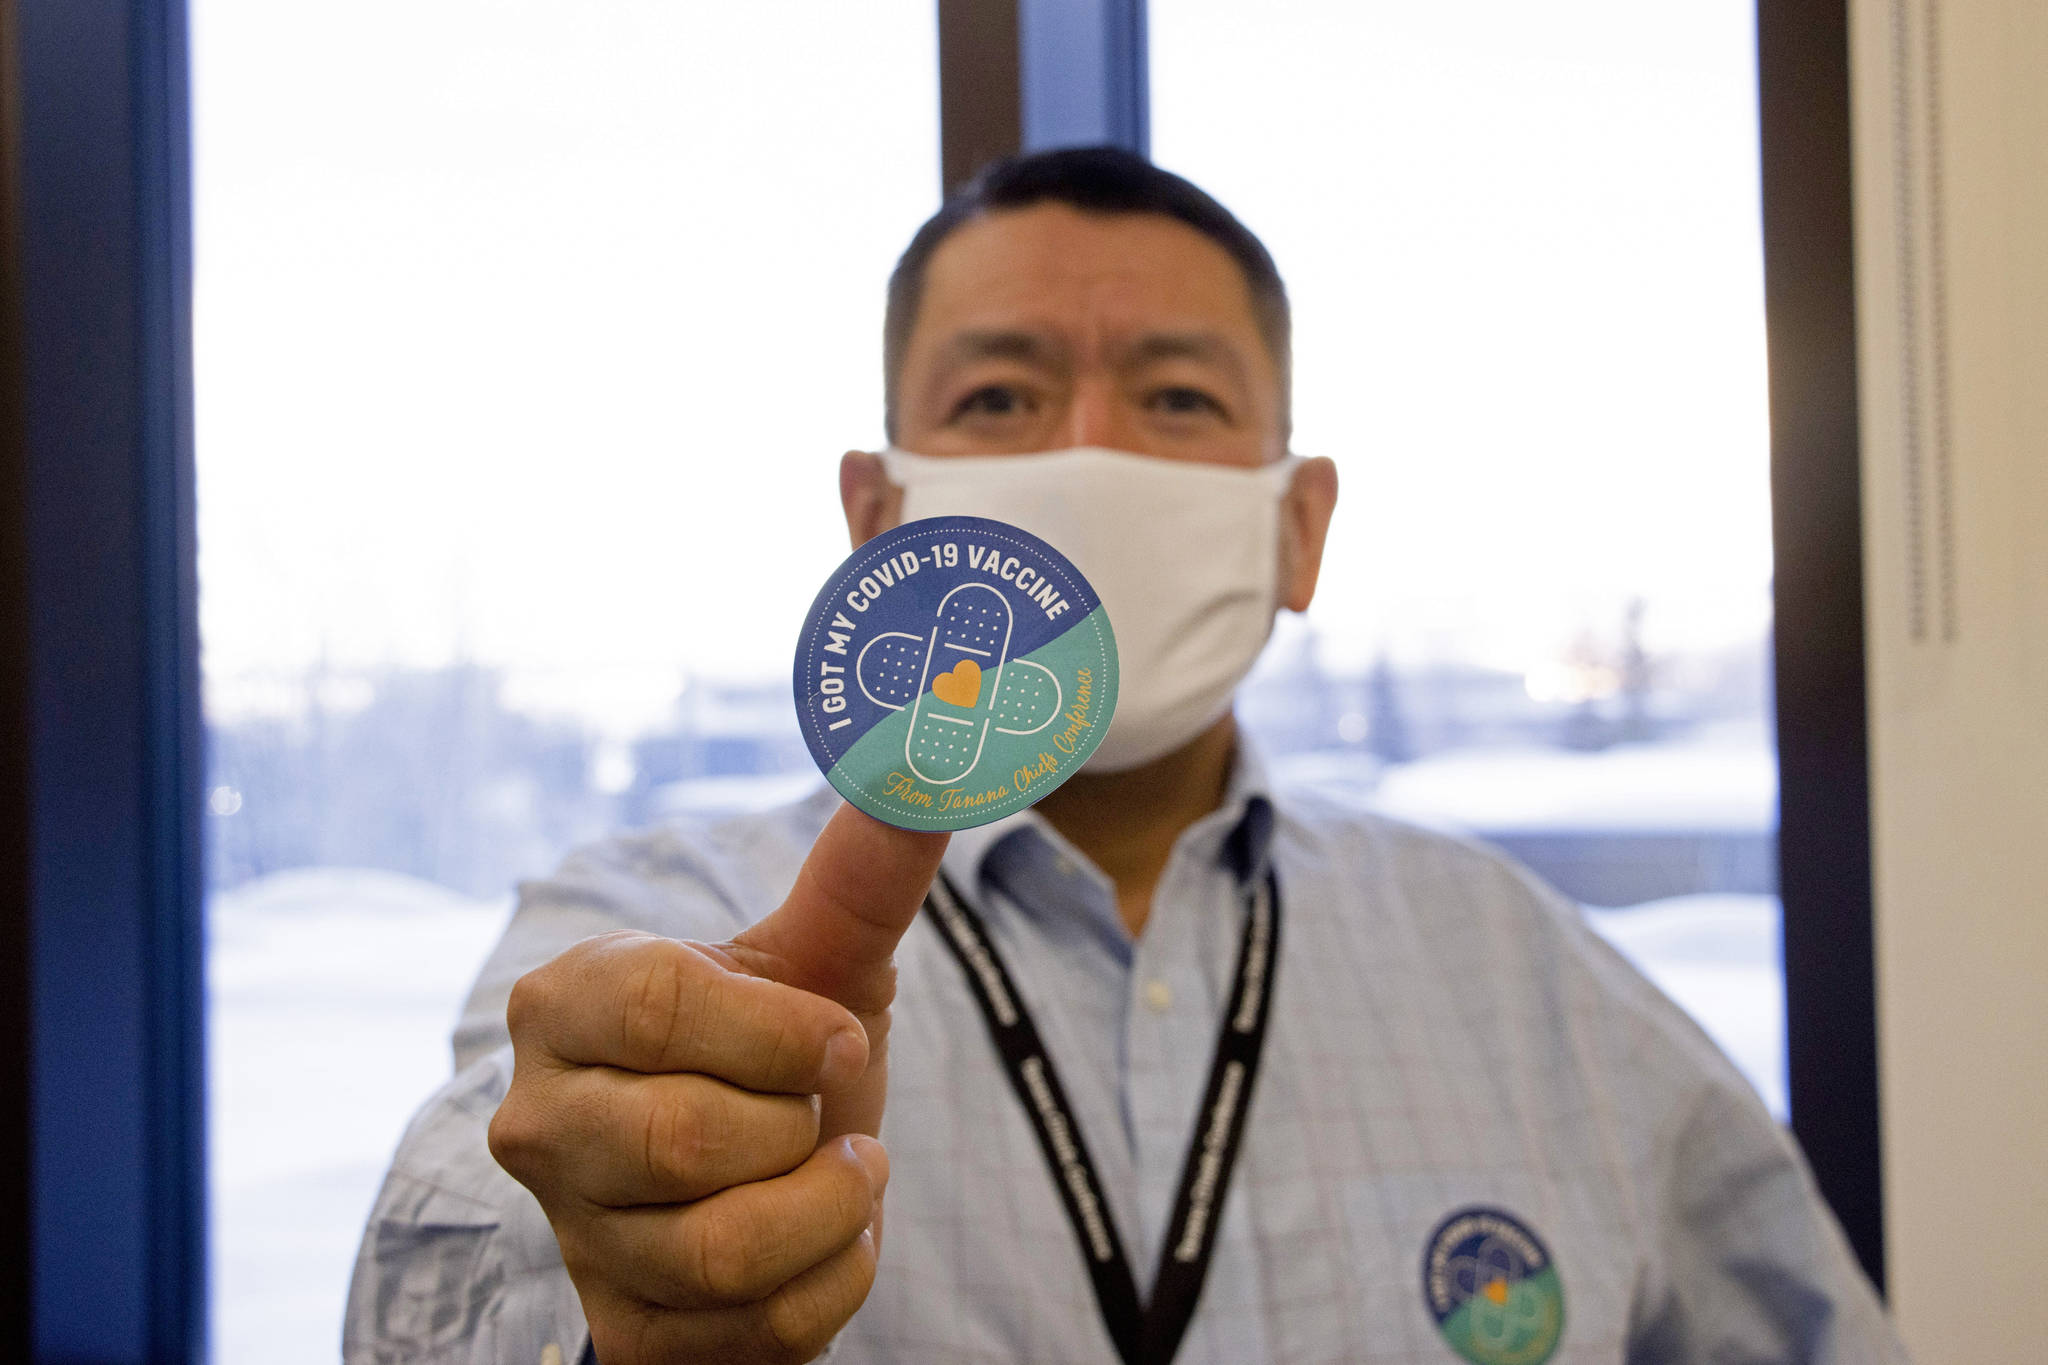 In this undated photo provided by the Tanana Chiefs Conference, shows PJ Simon, chief and chairman of the conference, from Fairbanks, Alaska, displaying a COVID-19 vaccination sticker. Alaska has been one of the leading states in the percentage of its population to be vaccinated against COVID-19. But some of Alaska’s highest vaccination rates have been in some of its most remote, hardest-to-access communities, where the toll of past flu or tuberculosis outbreaks hasn’t been forgotten. (Rachel Saylor/Tanana Chiefs Conference via AP)